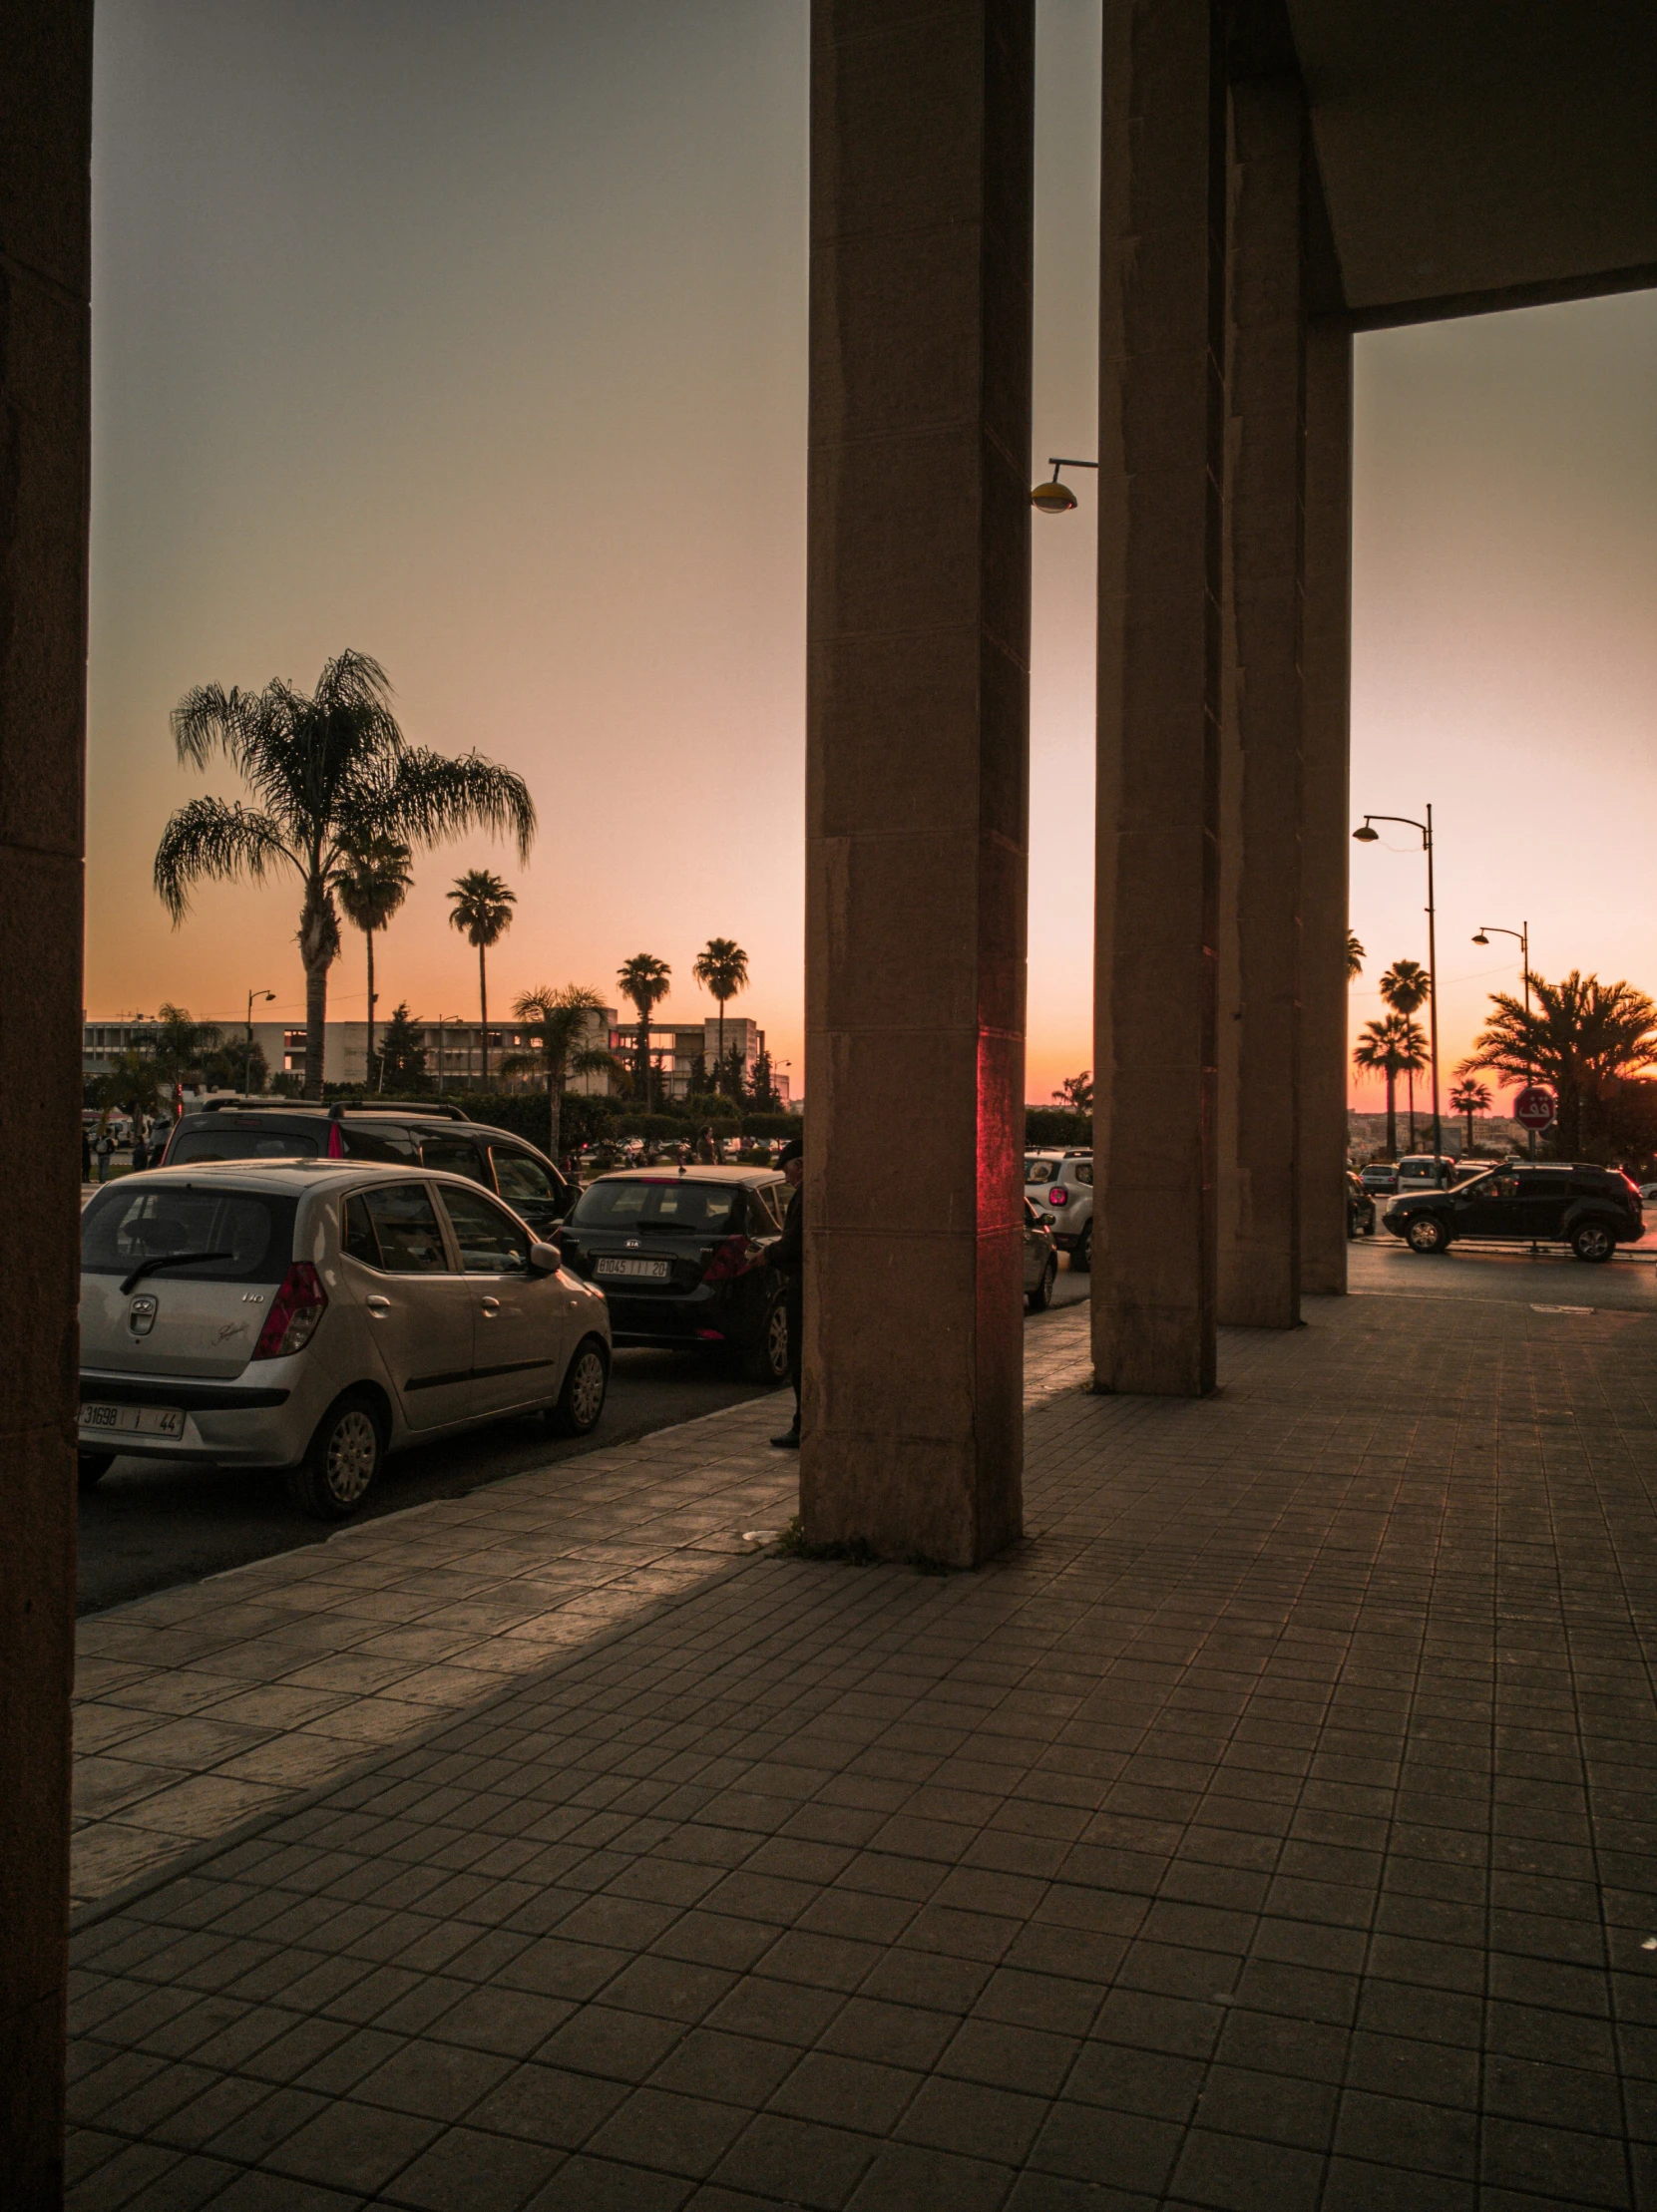 the sun setting over palm trees and parked cars